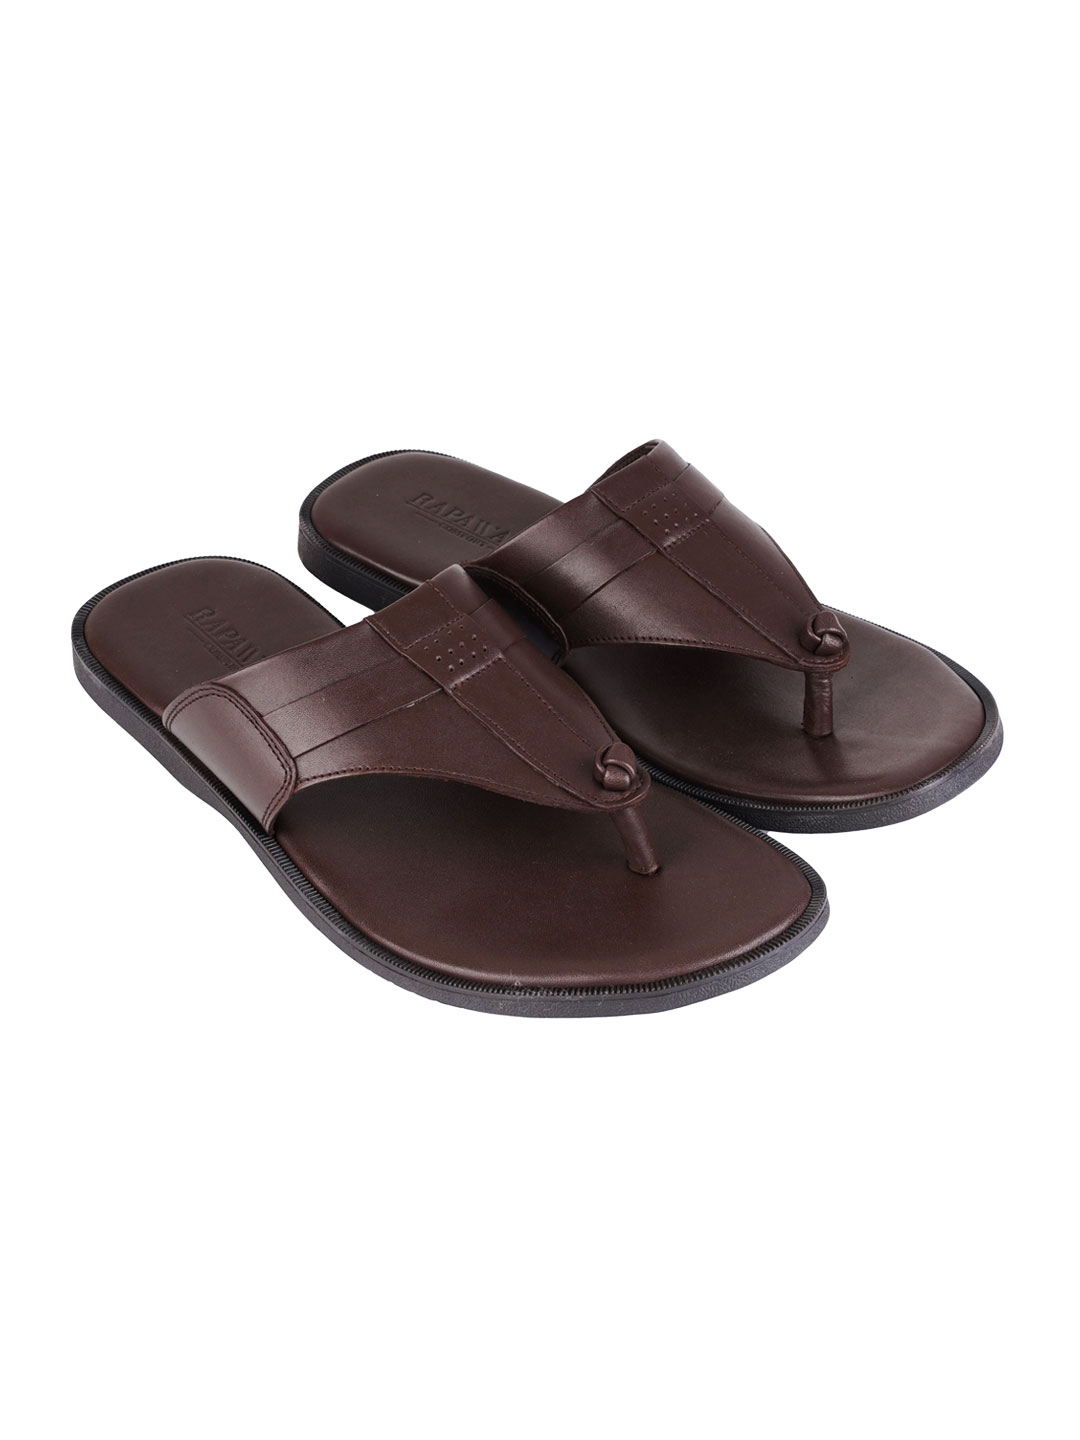 Amazon.com: Mens Brown Vegan Leather Sandals ~ Arabian style Sandals ~  Great For Dress up and Dress Down ~ SandCruisers : Handmade Products